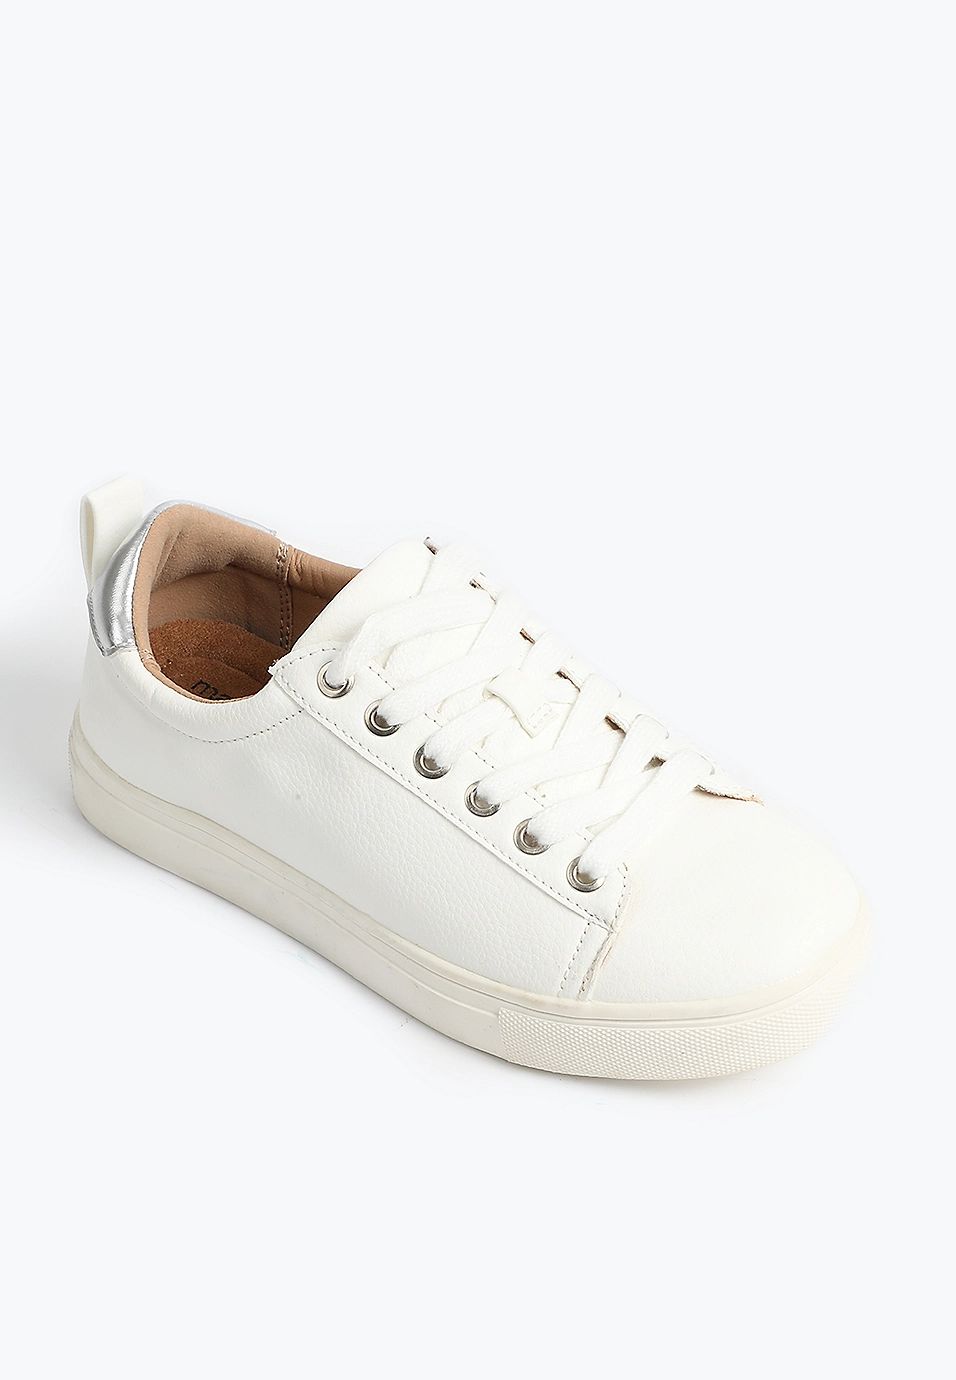 SuperCush Kendall White Metallic Lace Up Sneaker | Maurices